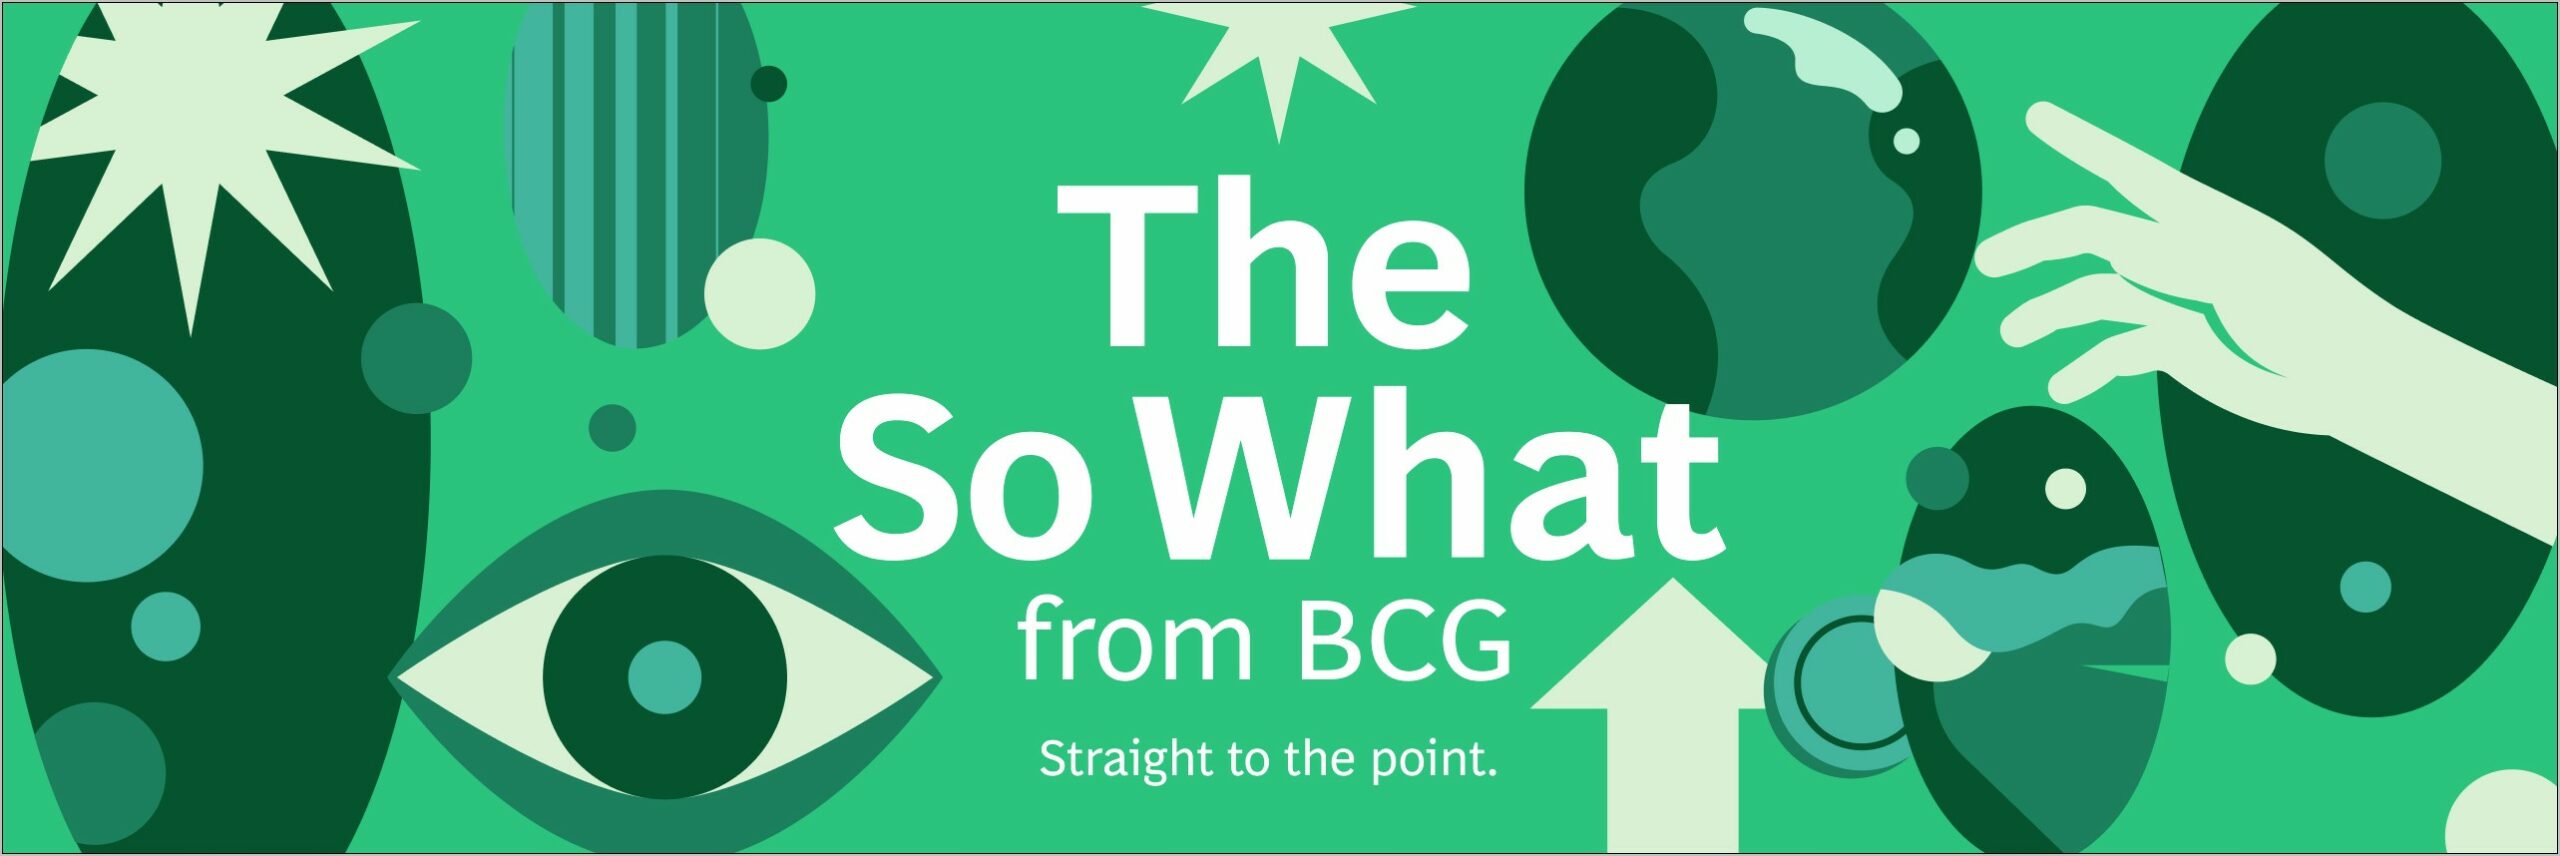 Bcg Recruiters Different Resumes Different Jobs